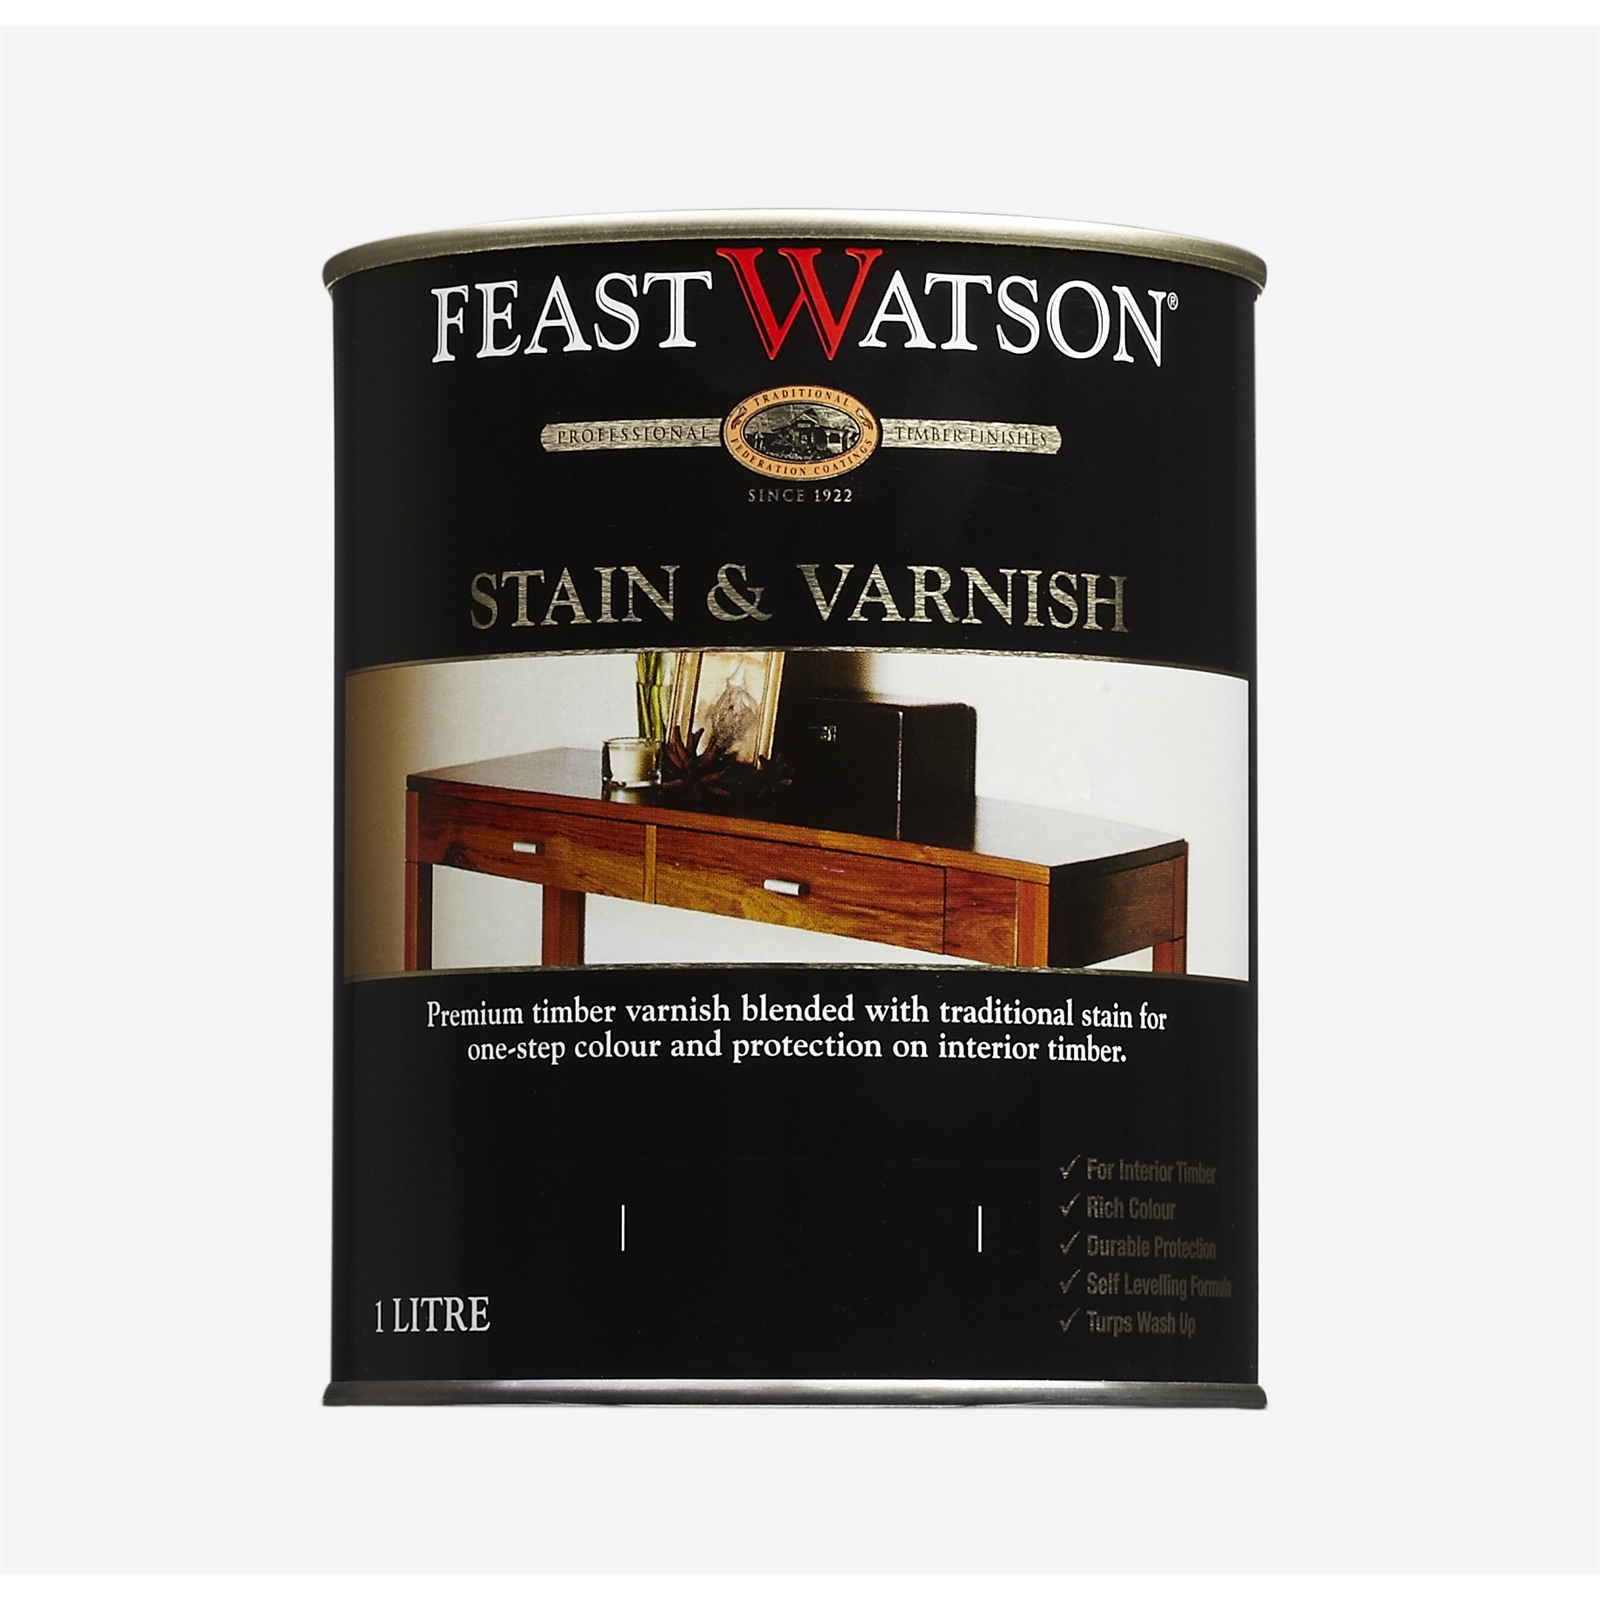 Feast Watson 1L Gloss Black Japan Stain And Varnish